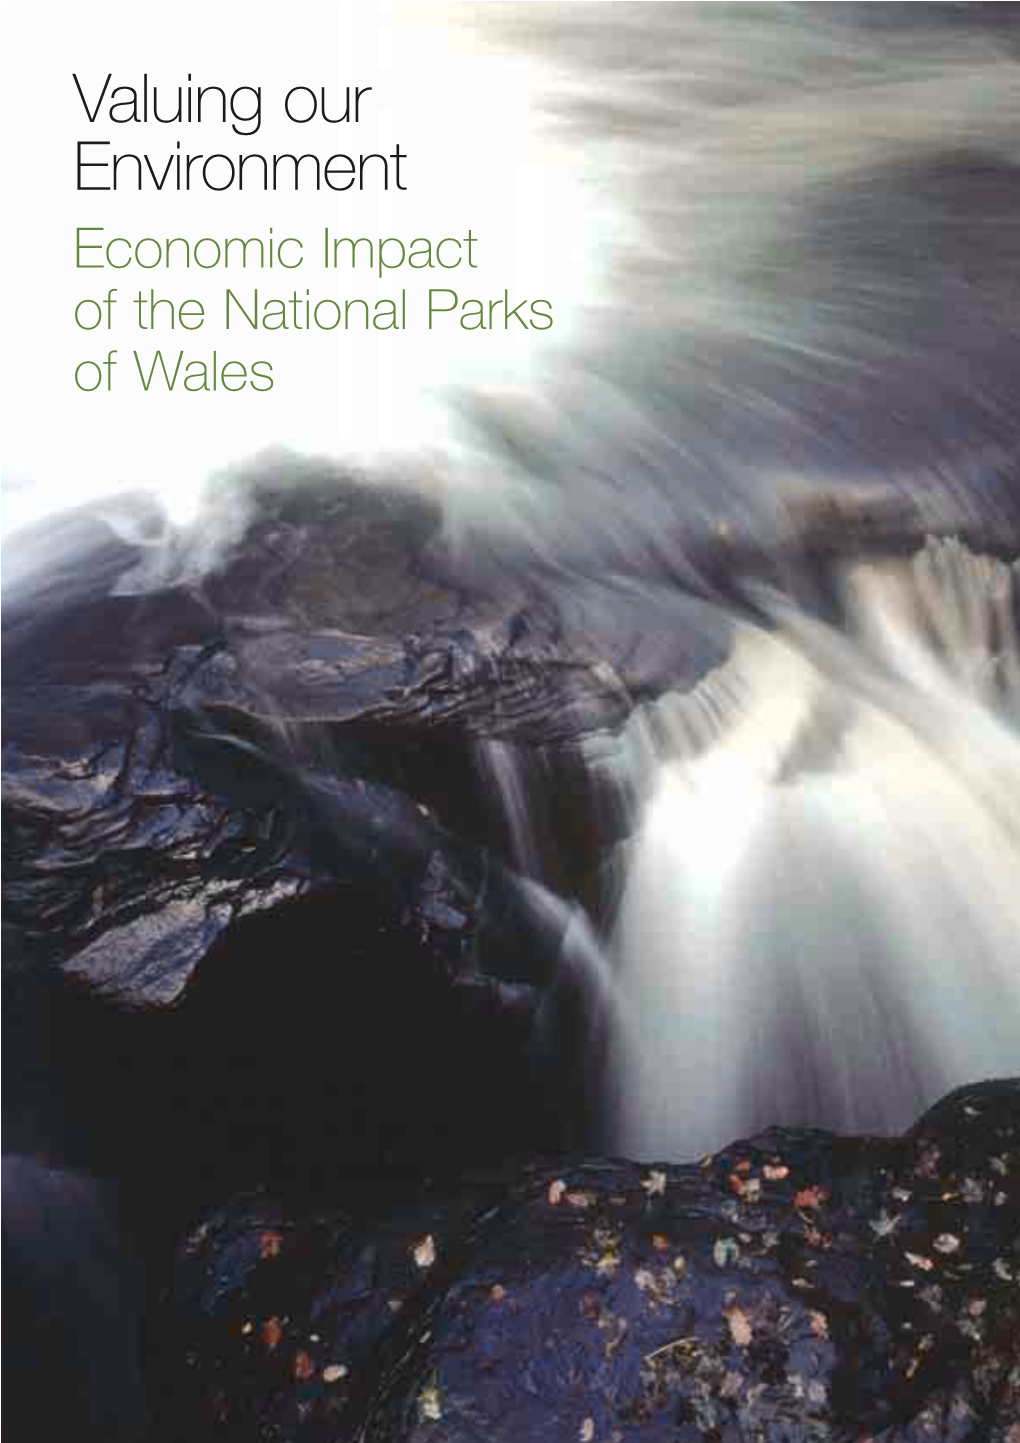 Valuing Our Environment Economic Impact of the National Parks of Wales Introduction to ‘Valuing Our Environment’